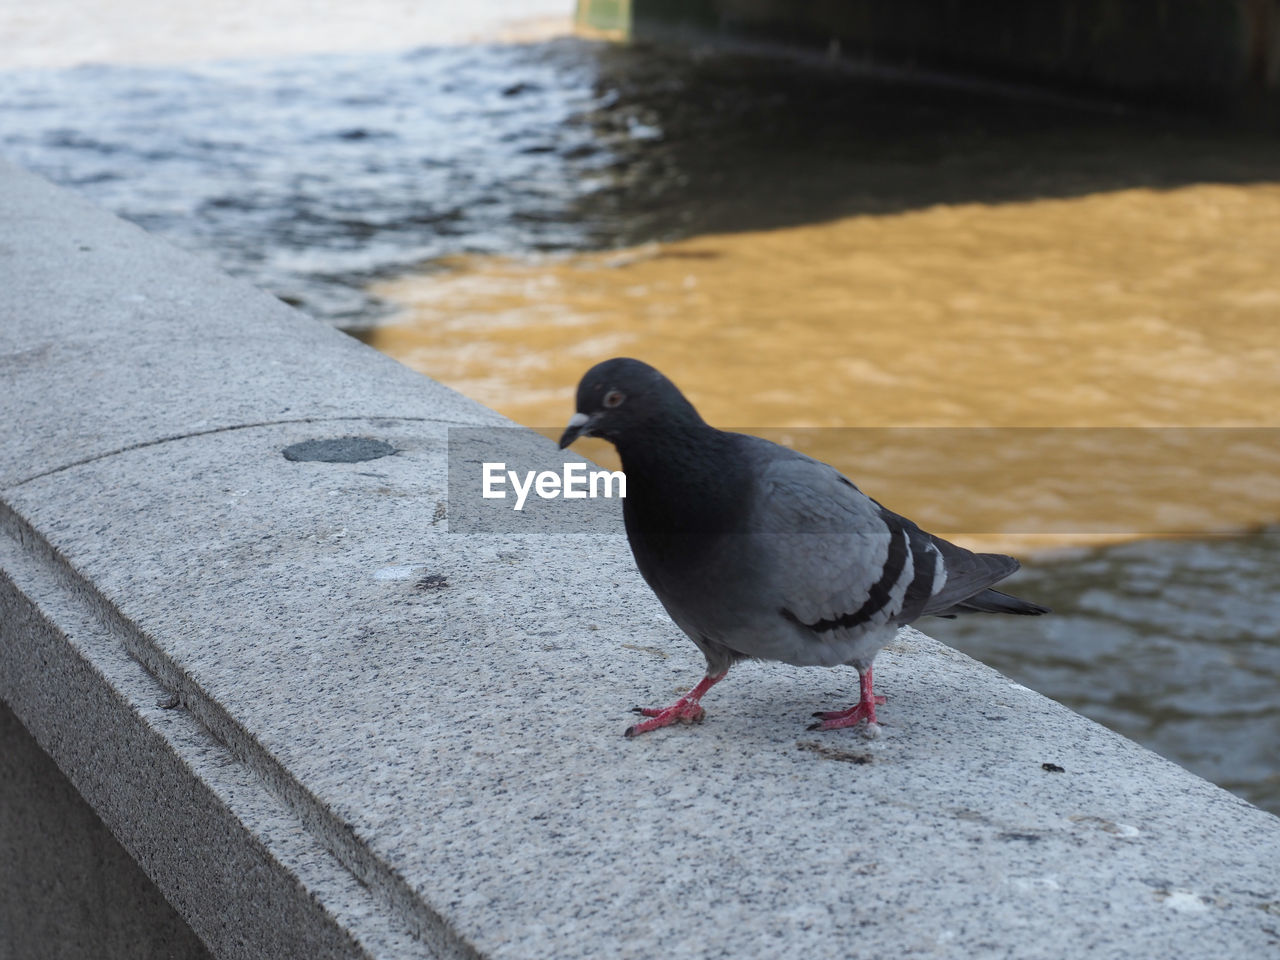 animal themes, animal, bird, wildlife, animal wildlife, one animal, water, day, perching, no people, nature, blue, pigeon, beak, pigeons and doves, focus on foreground, outdoors, retaining wall, close-up, dove - bird